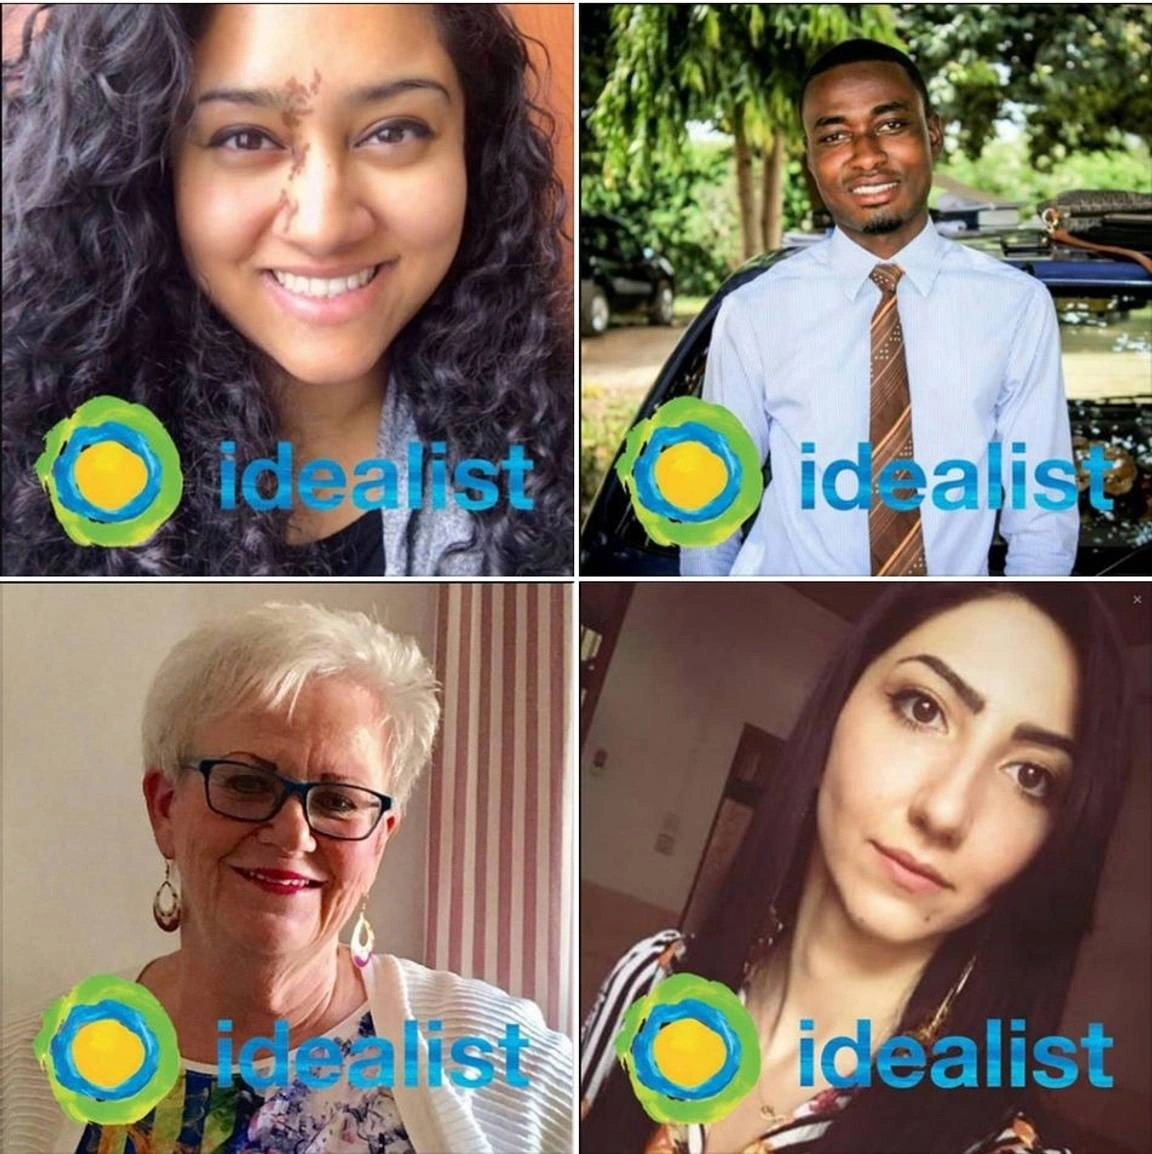 Four people smile at the camera with the Idealist logo in front of them.